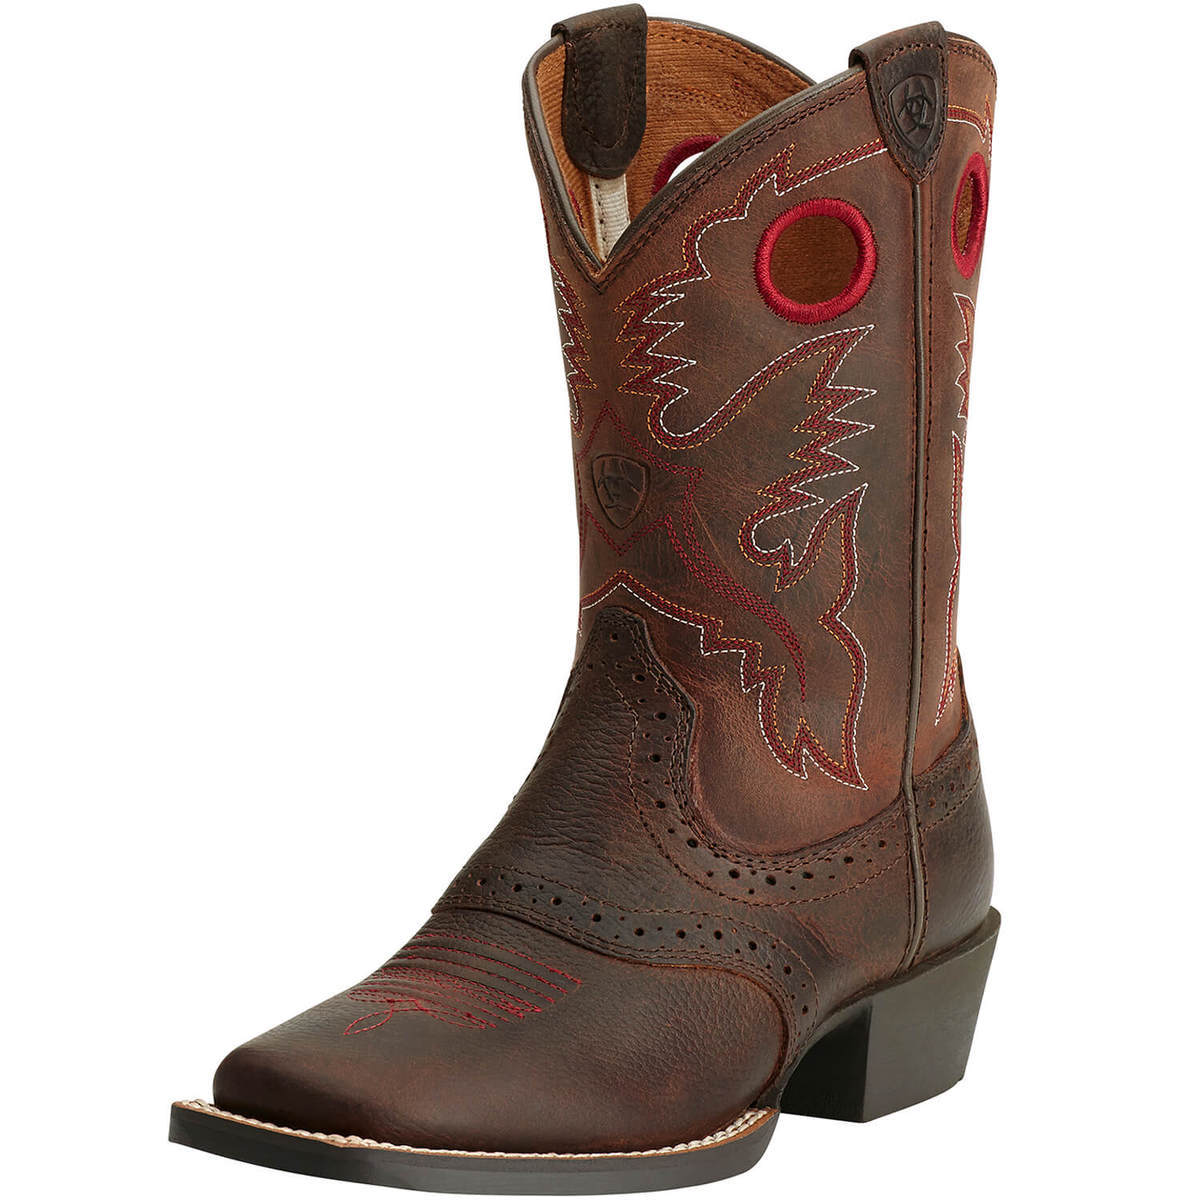 Ariat Men's Heritage Roughstock Western Performance Boots - Square Toe